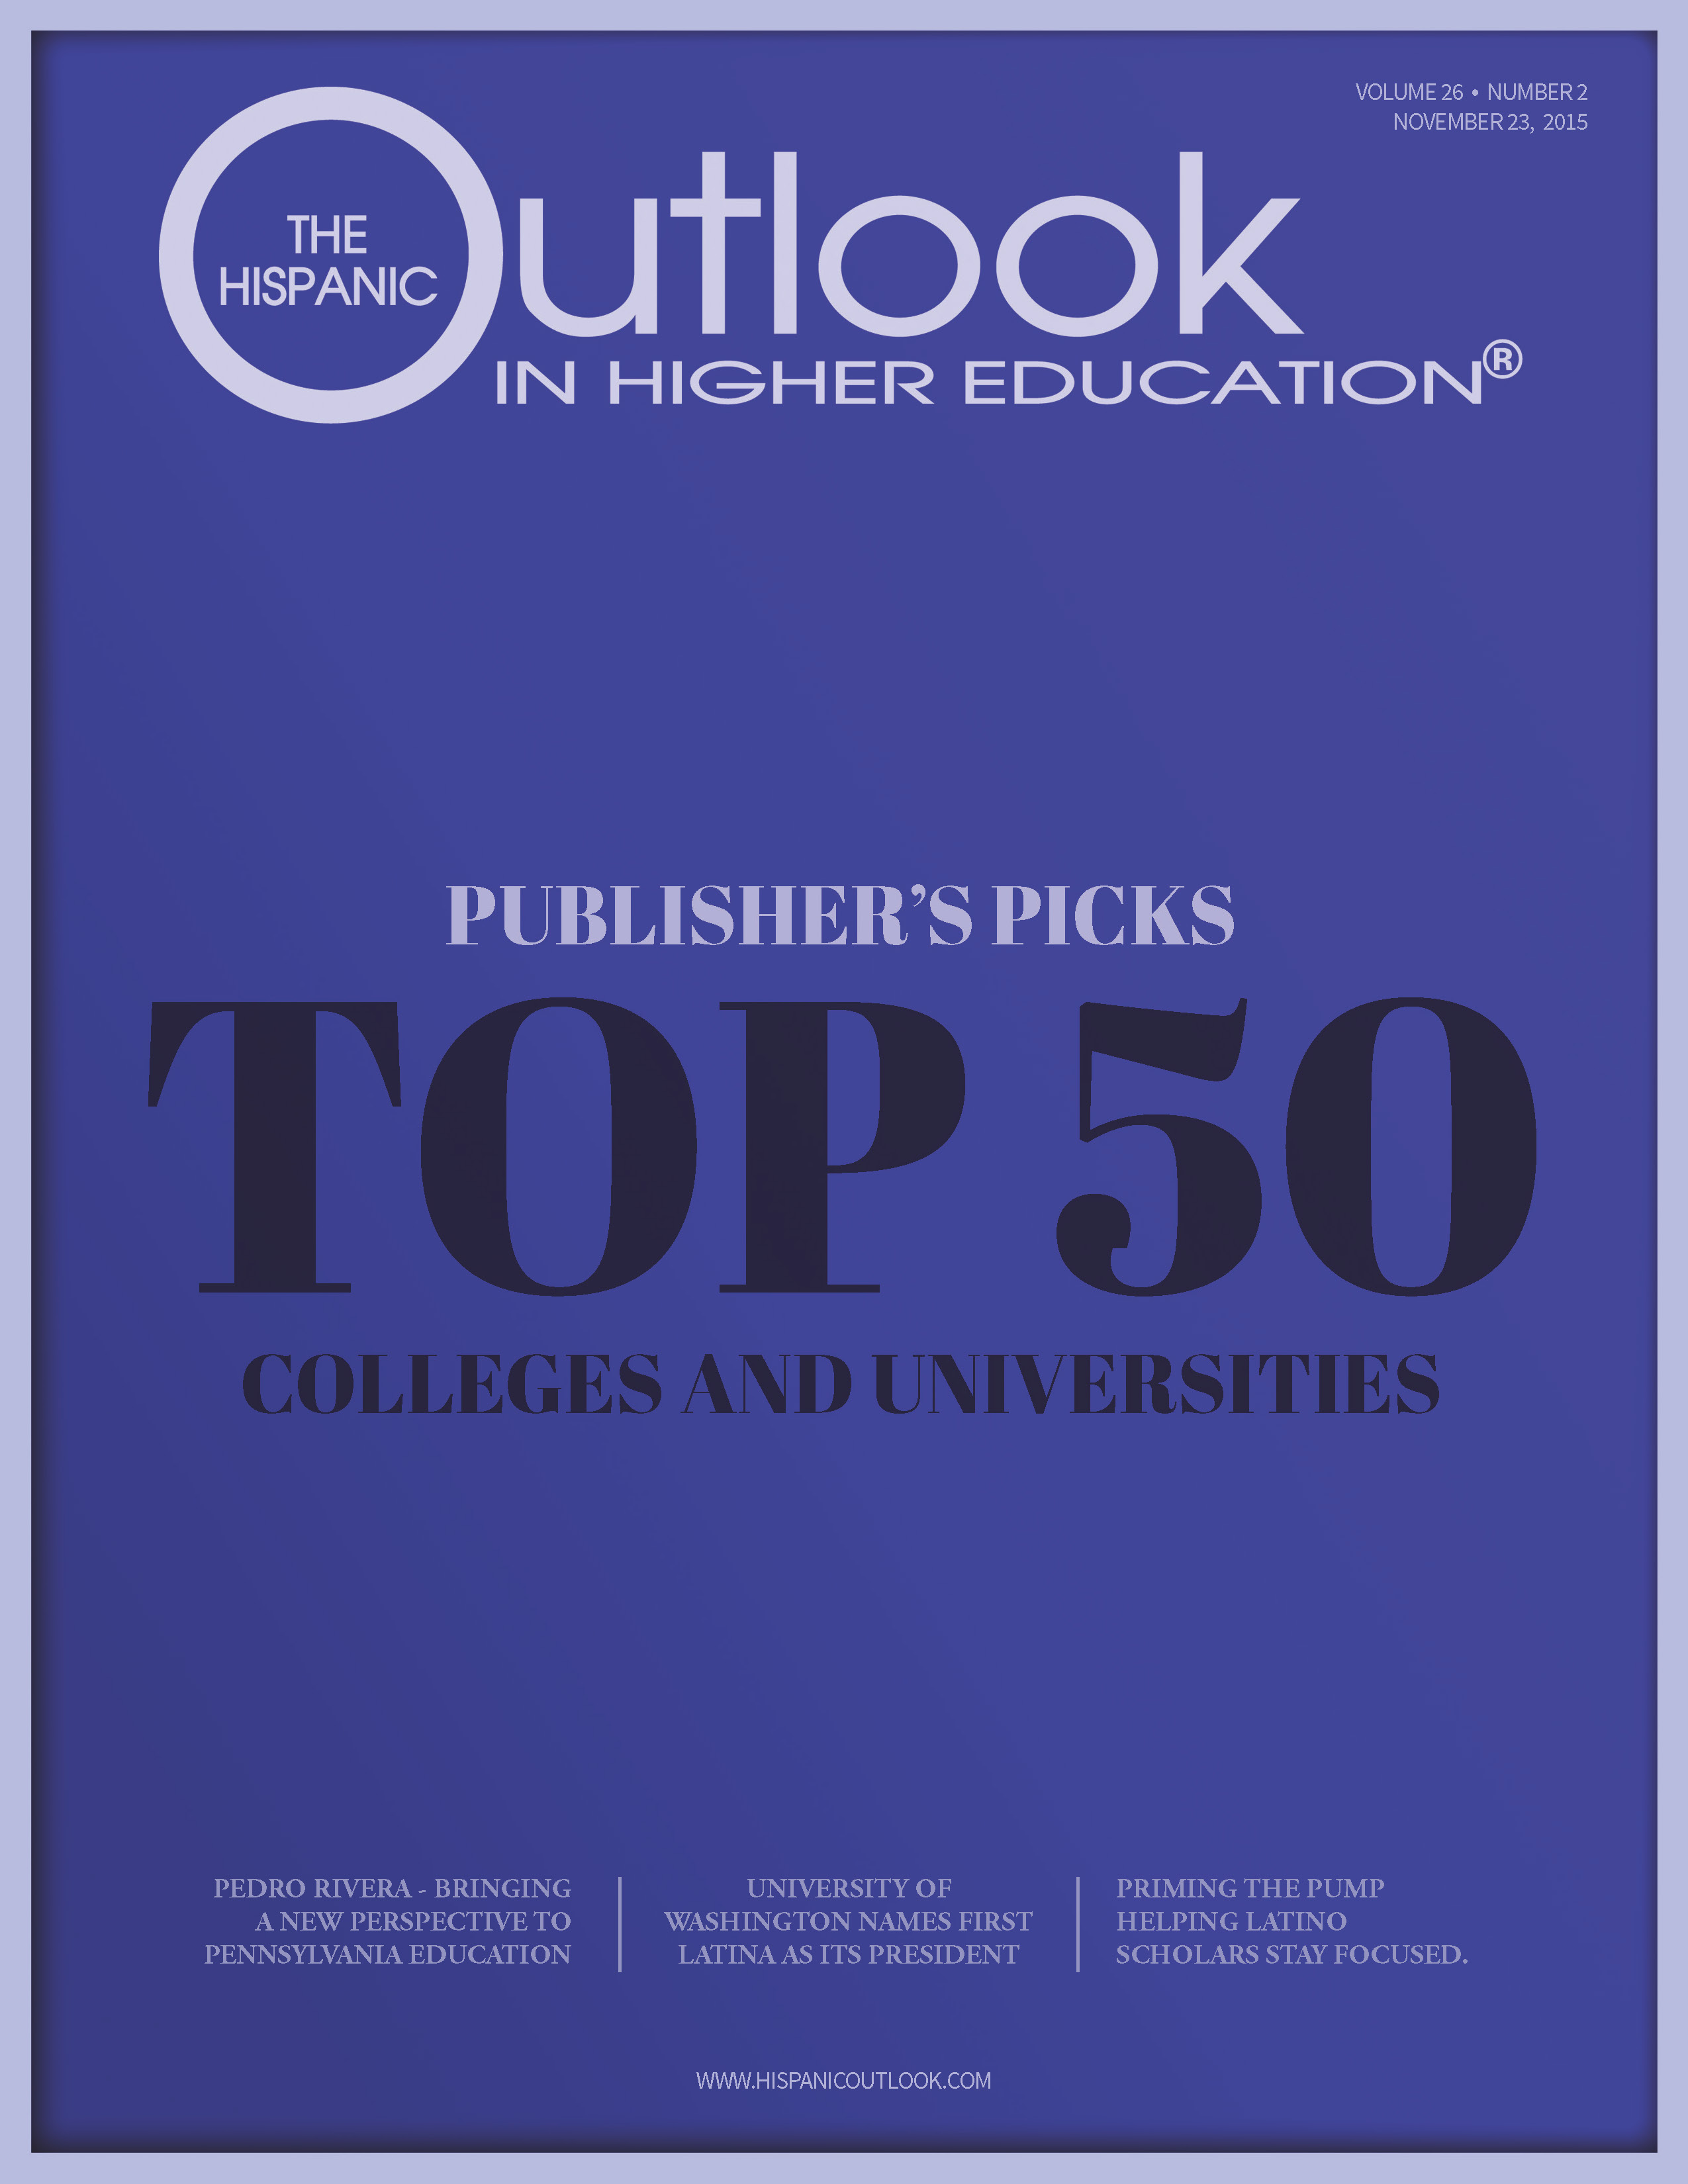 Publisher Picks Top 50 Colleges and Universities